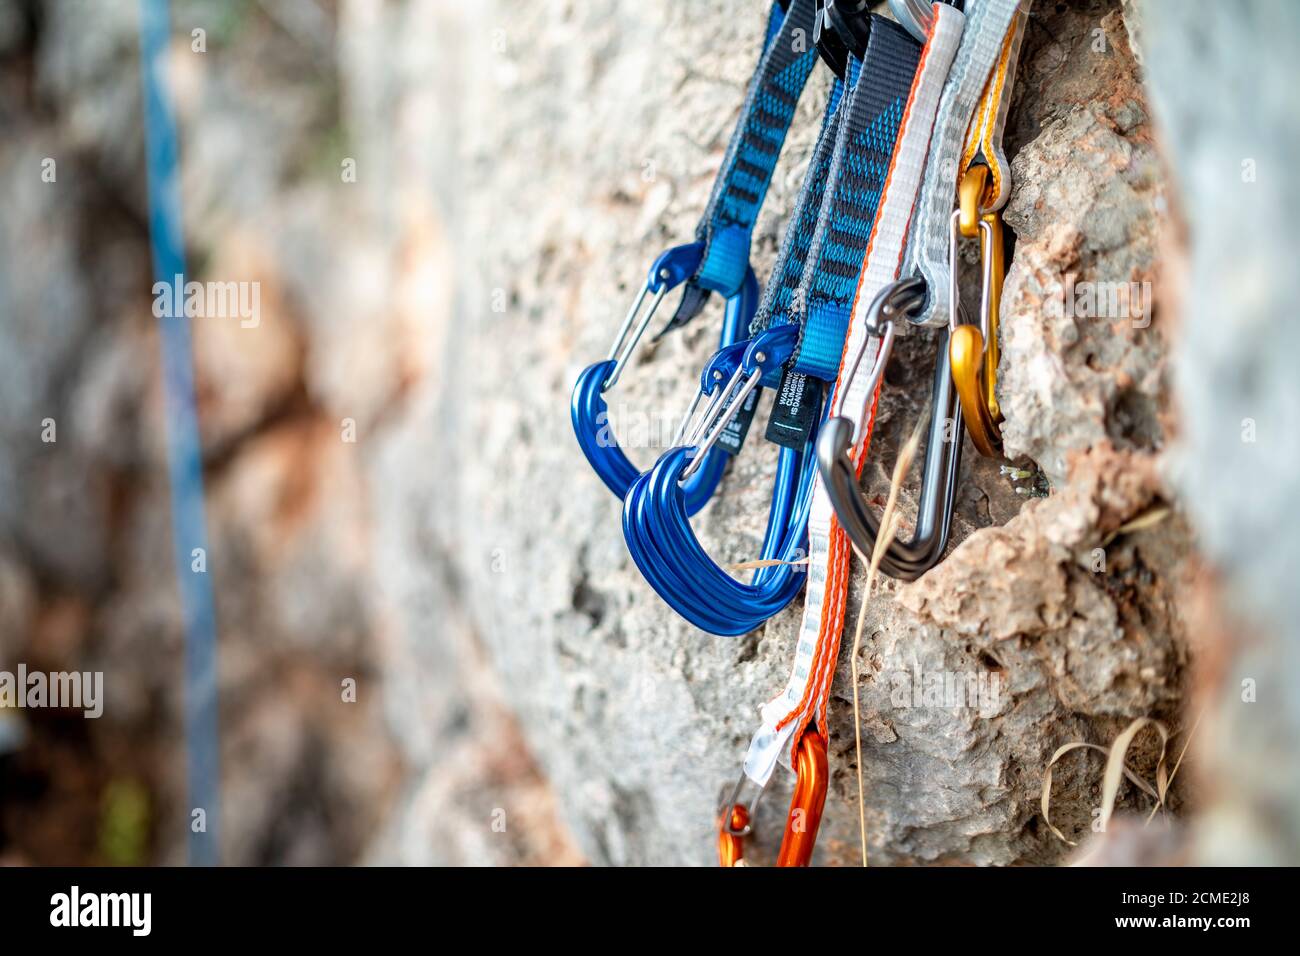 Closeup shot of a variety of carabiner hooks, rope, and other